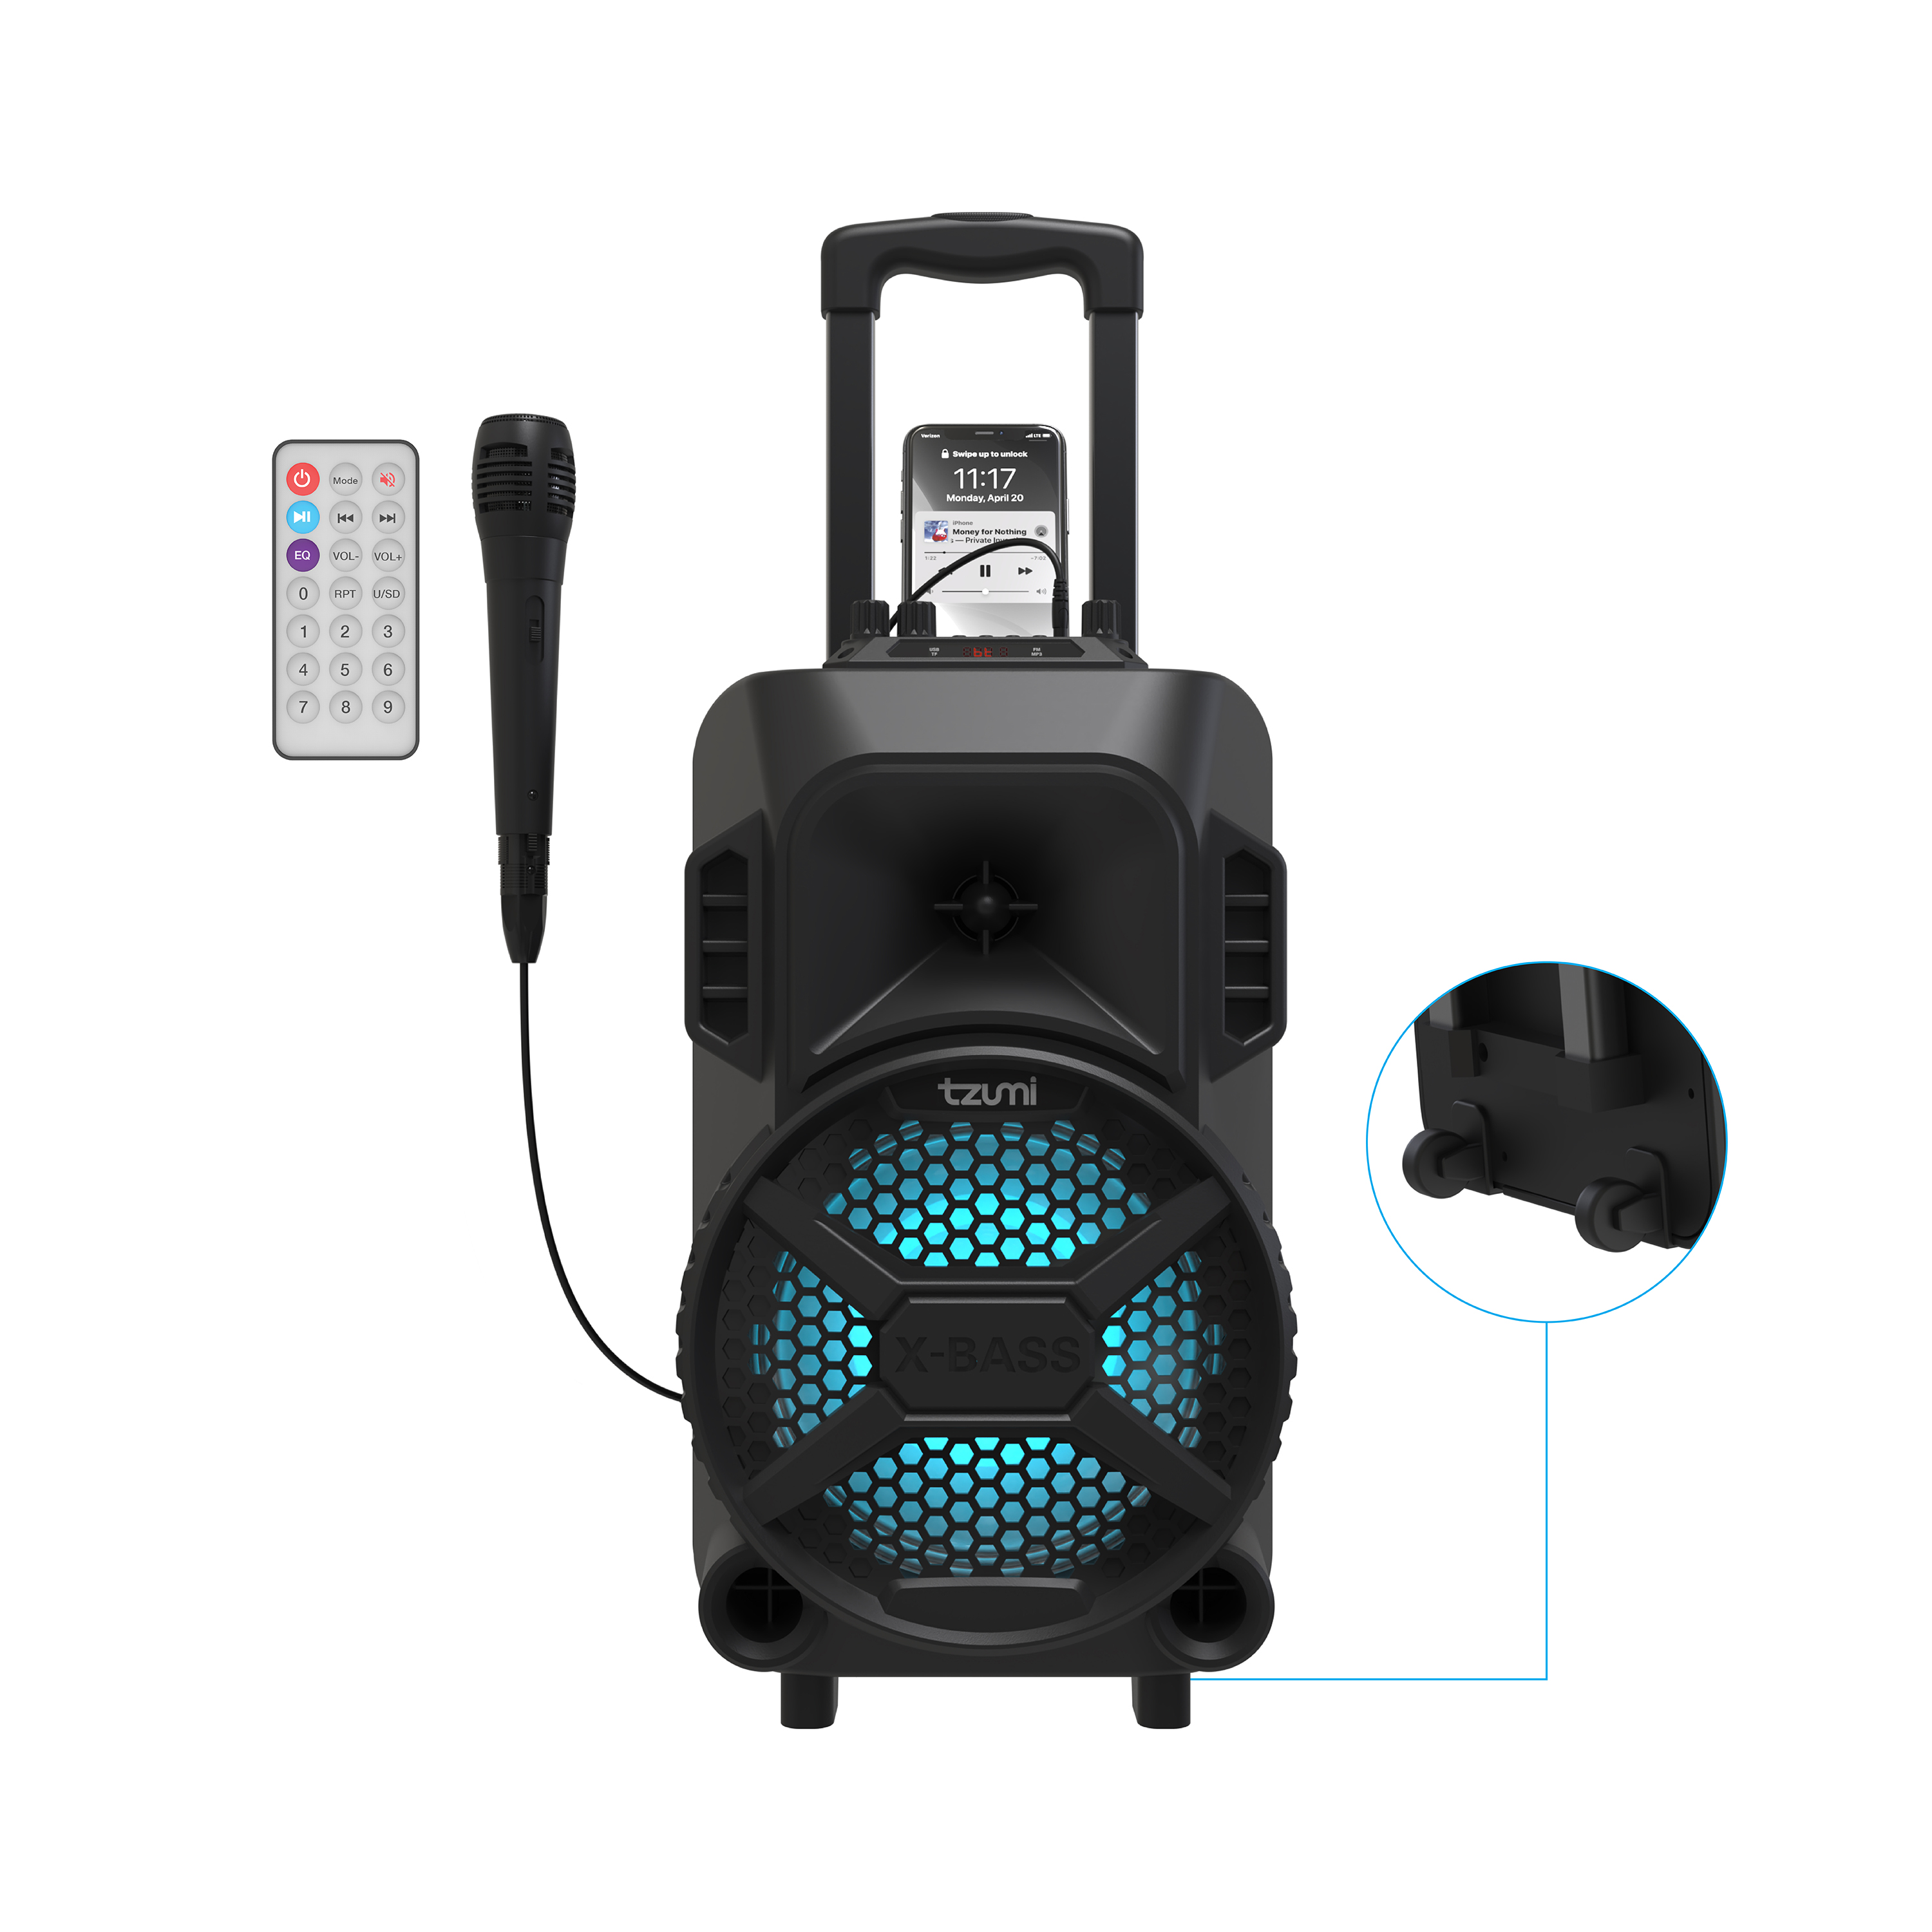 MegaBass LED Jobsite Speaker, Rechargeable Bluetooth Party Speaker with 8in. Subwoofer and Microphone - image 1 of 11